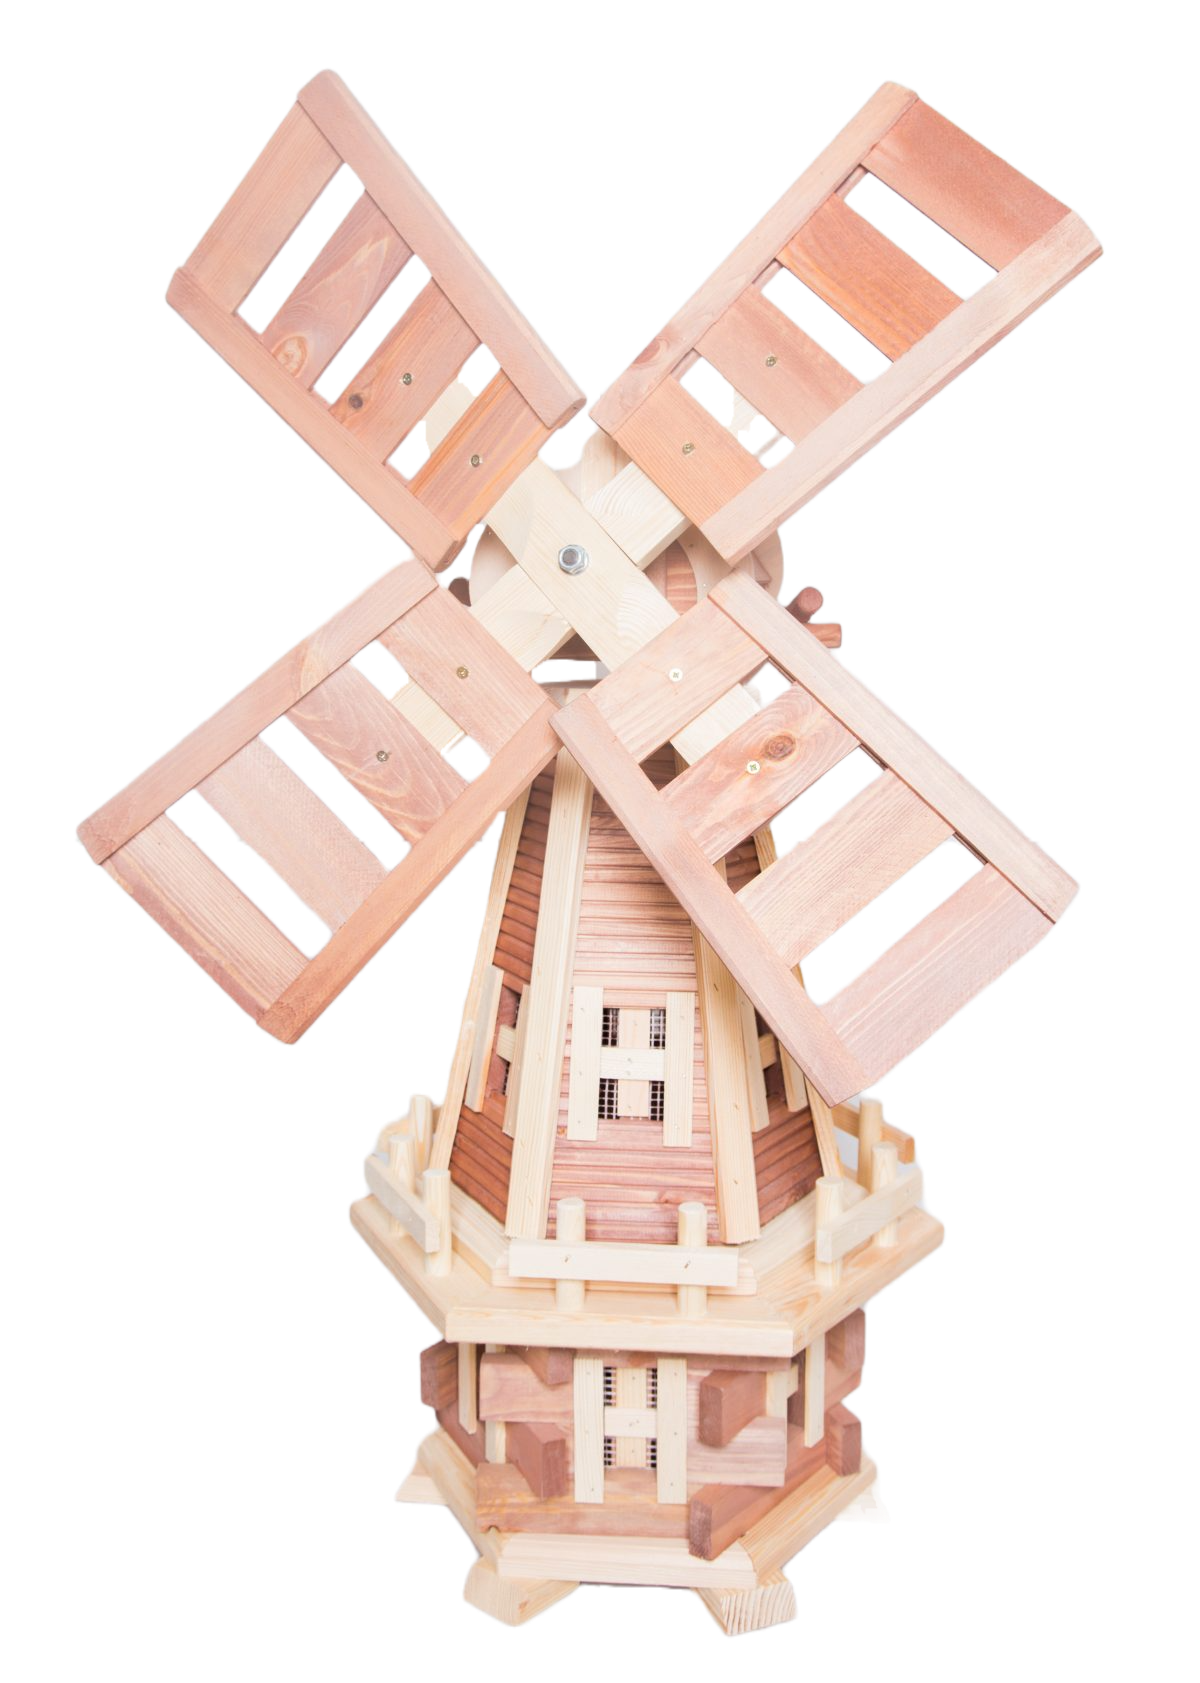 "Handmade wooden garden windmill: A rustic masterpiece standing tall with rotating blades, adding charm and elegance to any outdoor space."